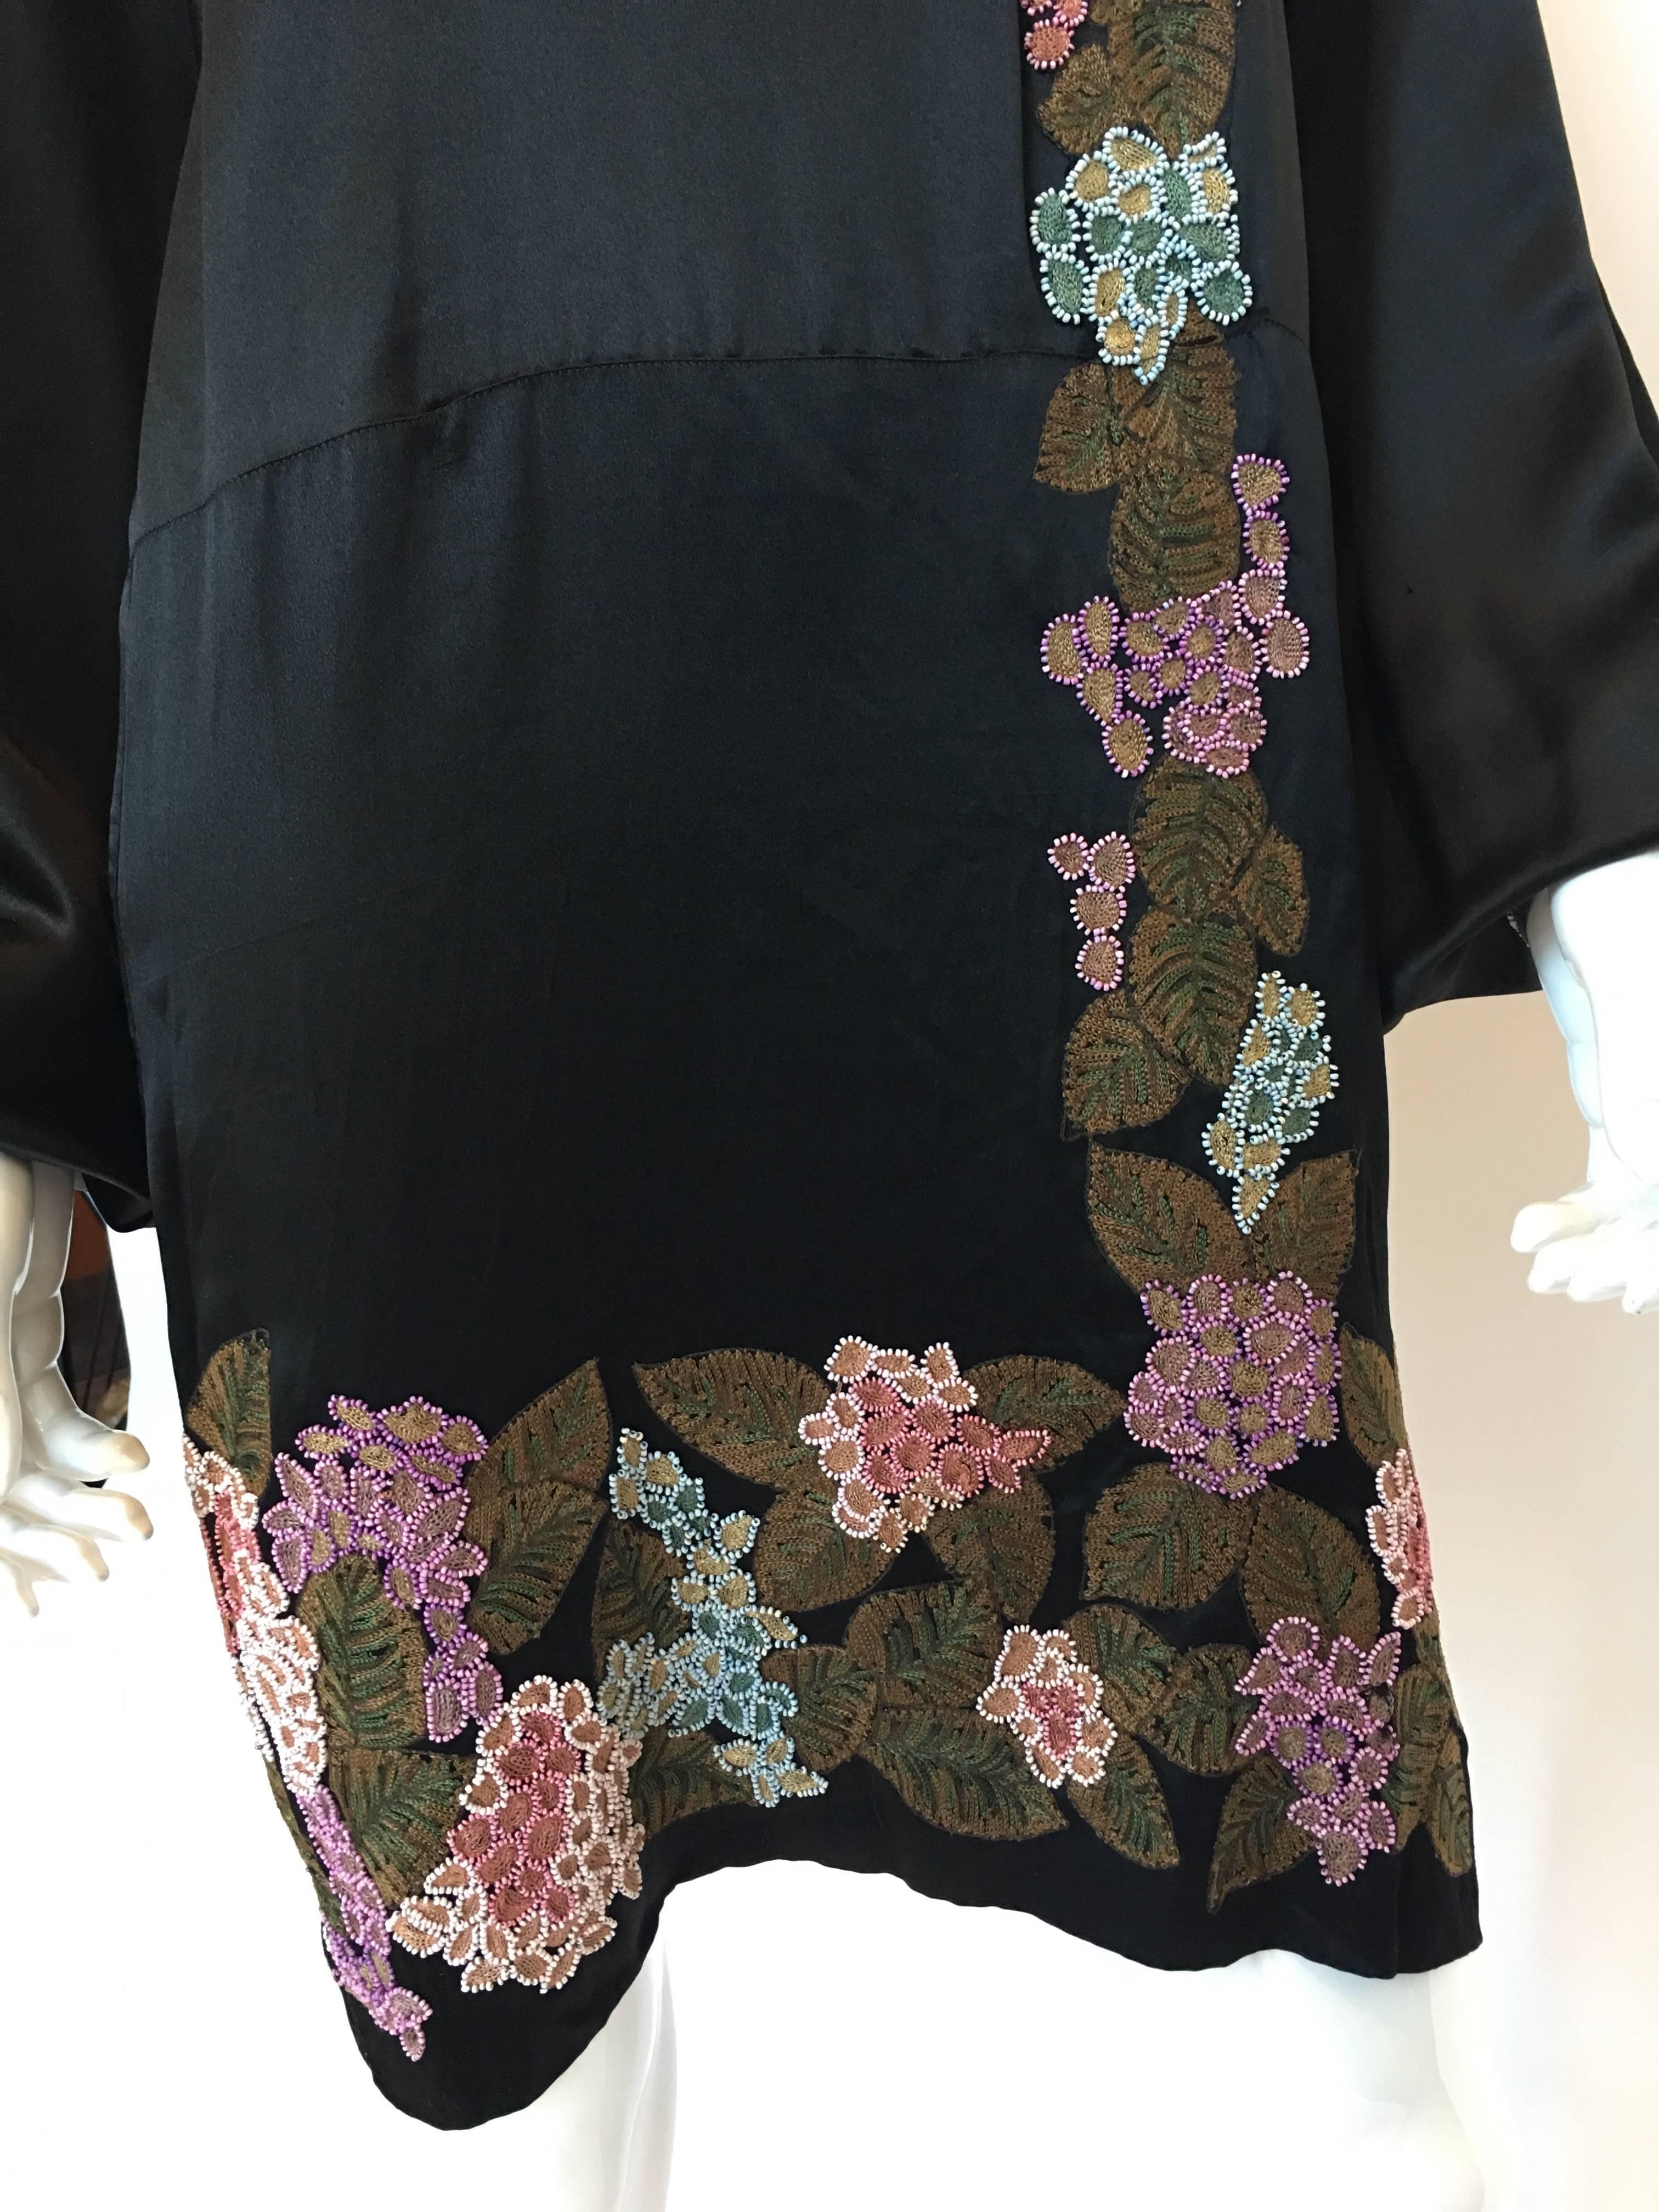 Handmade Black Silk Embroidered and Beaded Floral Trim Dress, 1920s 1